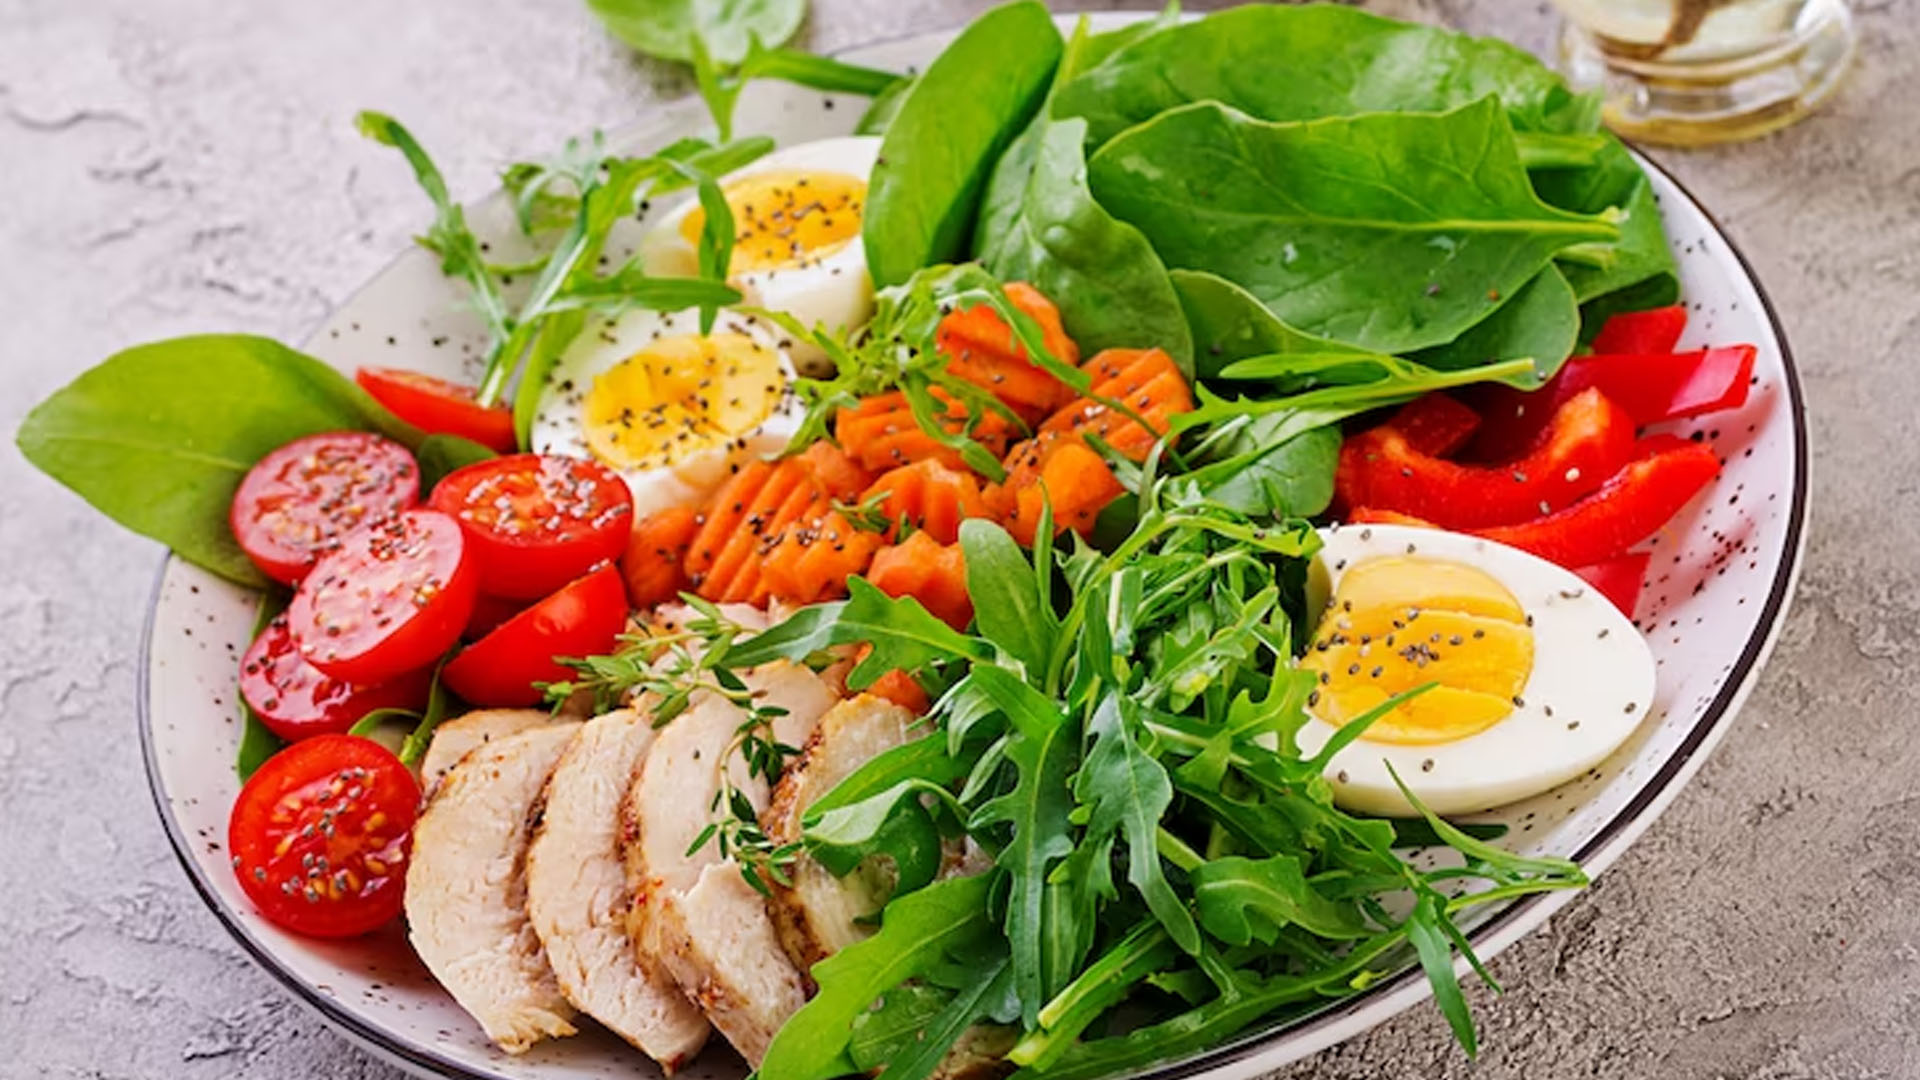 What Are The Health Benefits of Ketogenic Diet?